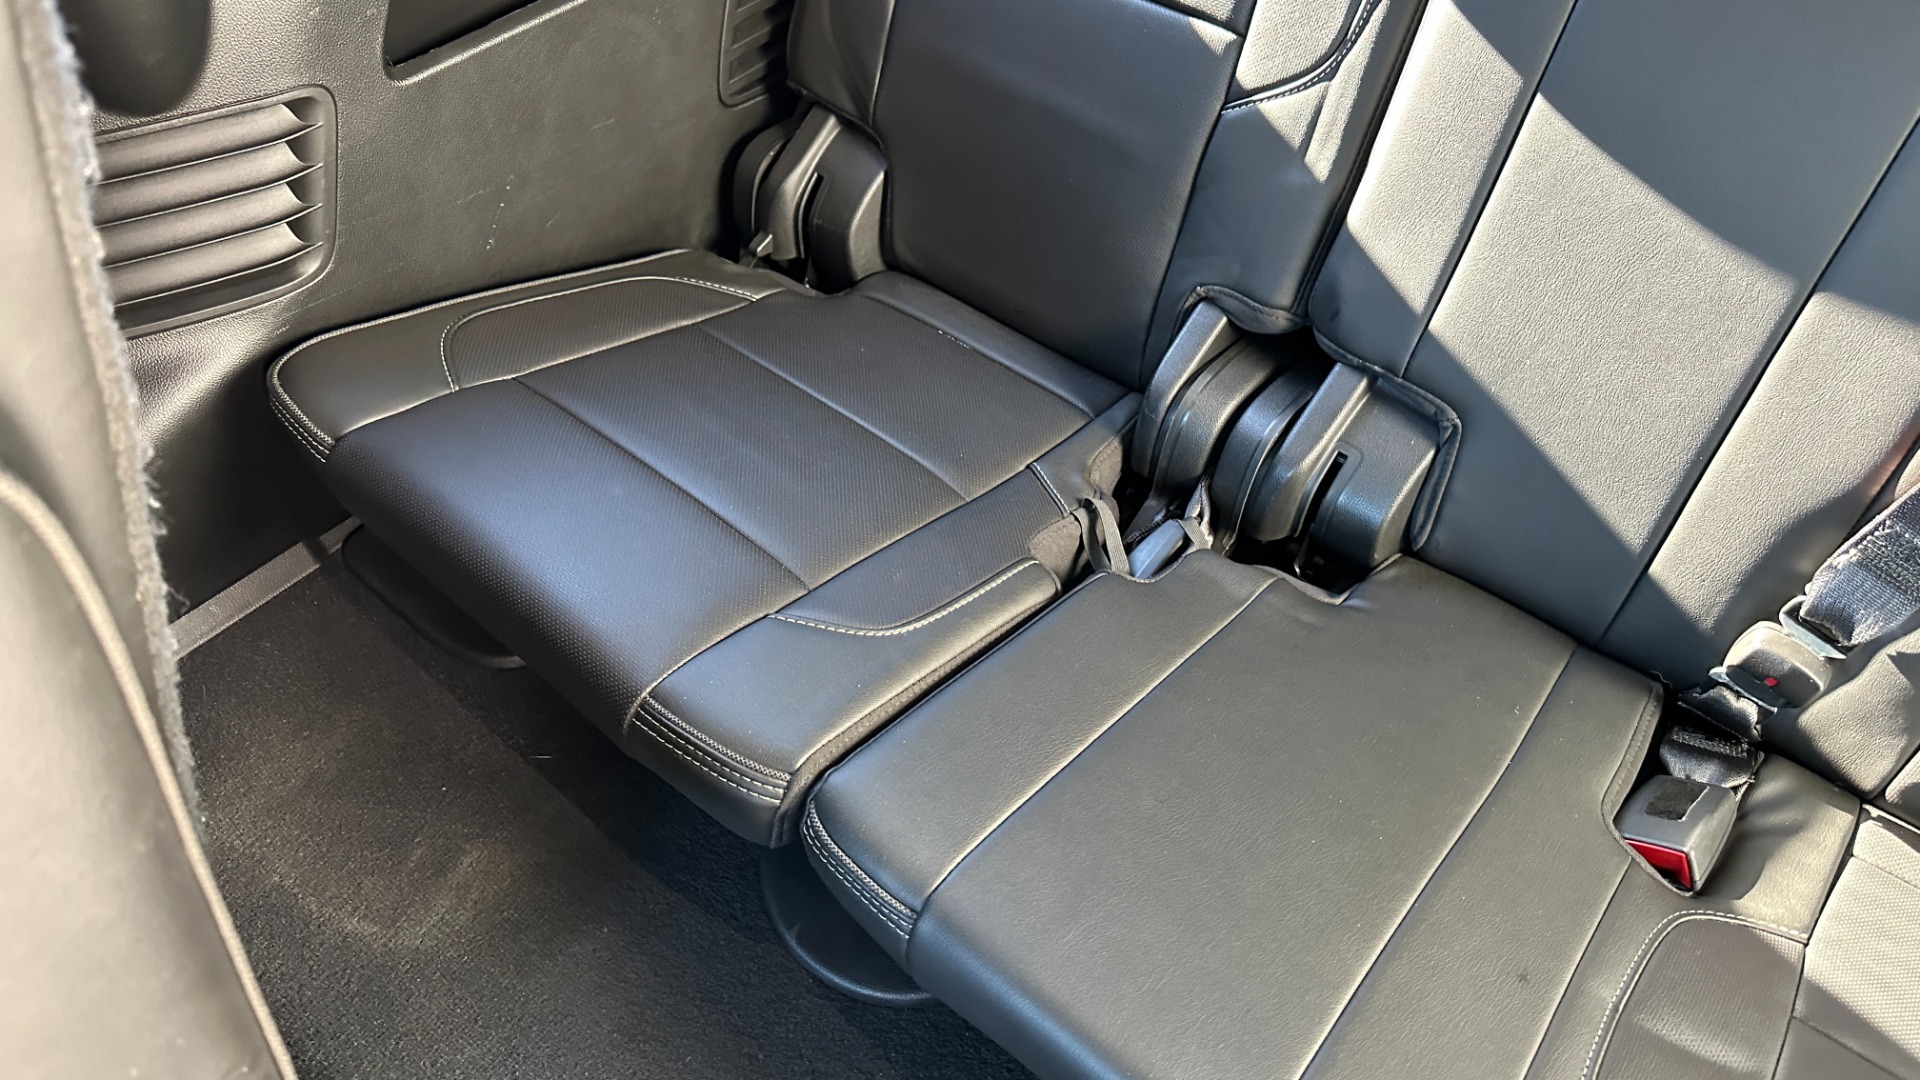 Used 2019 GMC Yukon DENALI ULTIMATE / DVD / CAPTAINS CHAIRS / 3RD ROW / LEATHER / NAV for sale Sold at Formula Imports in Charlotte NC 28227 28